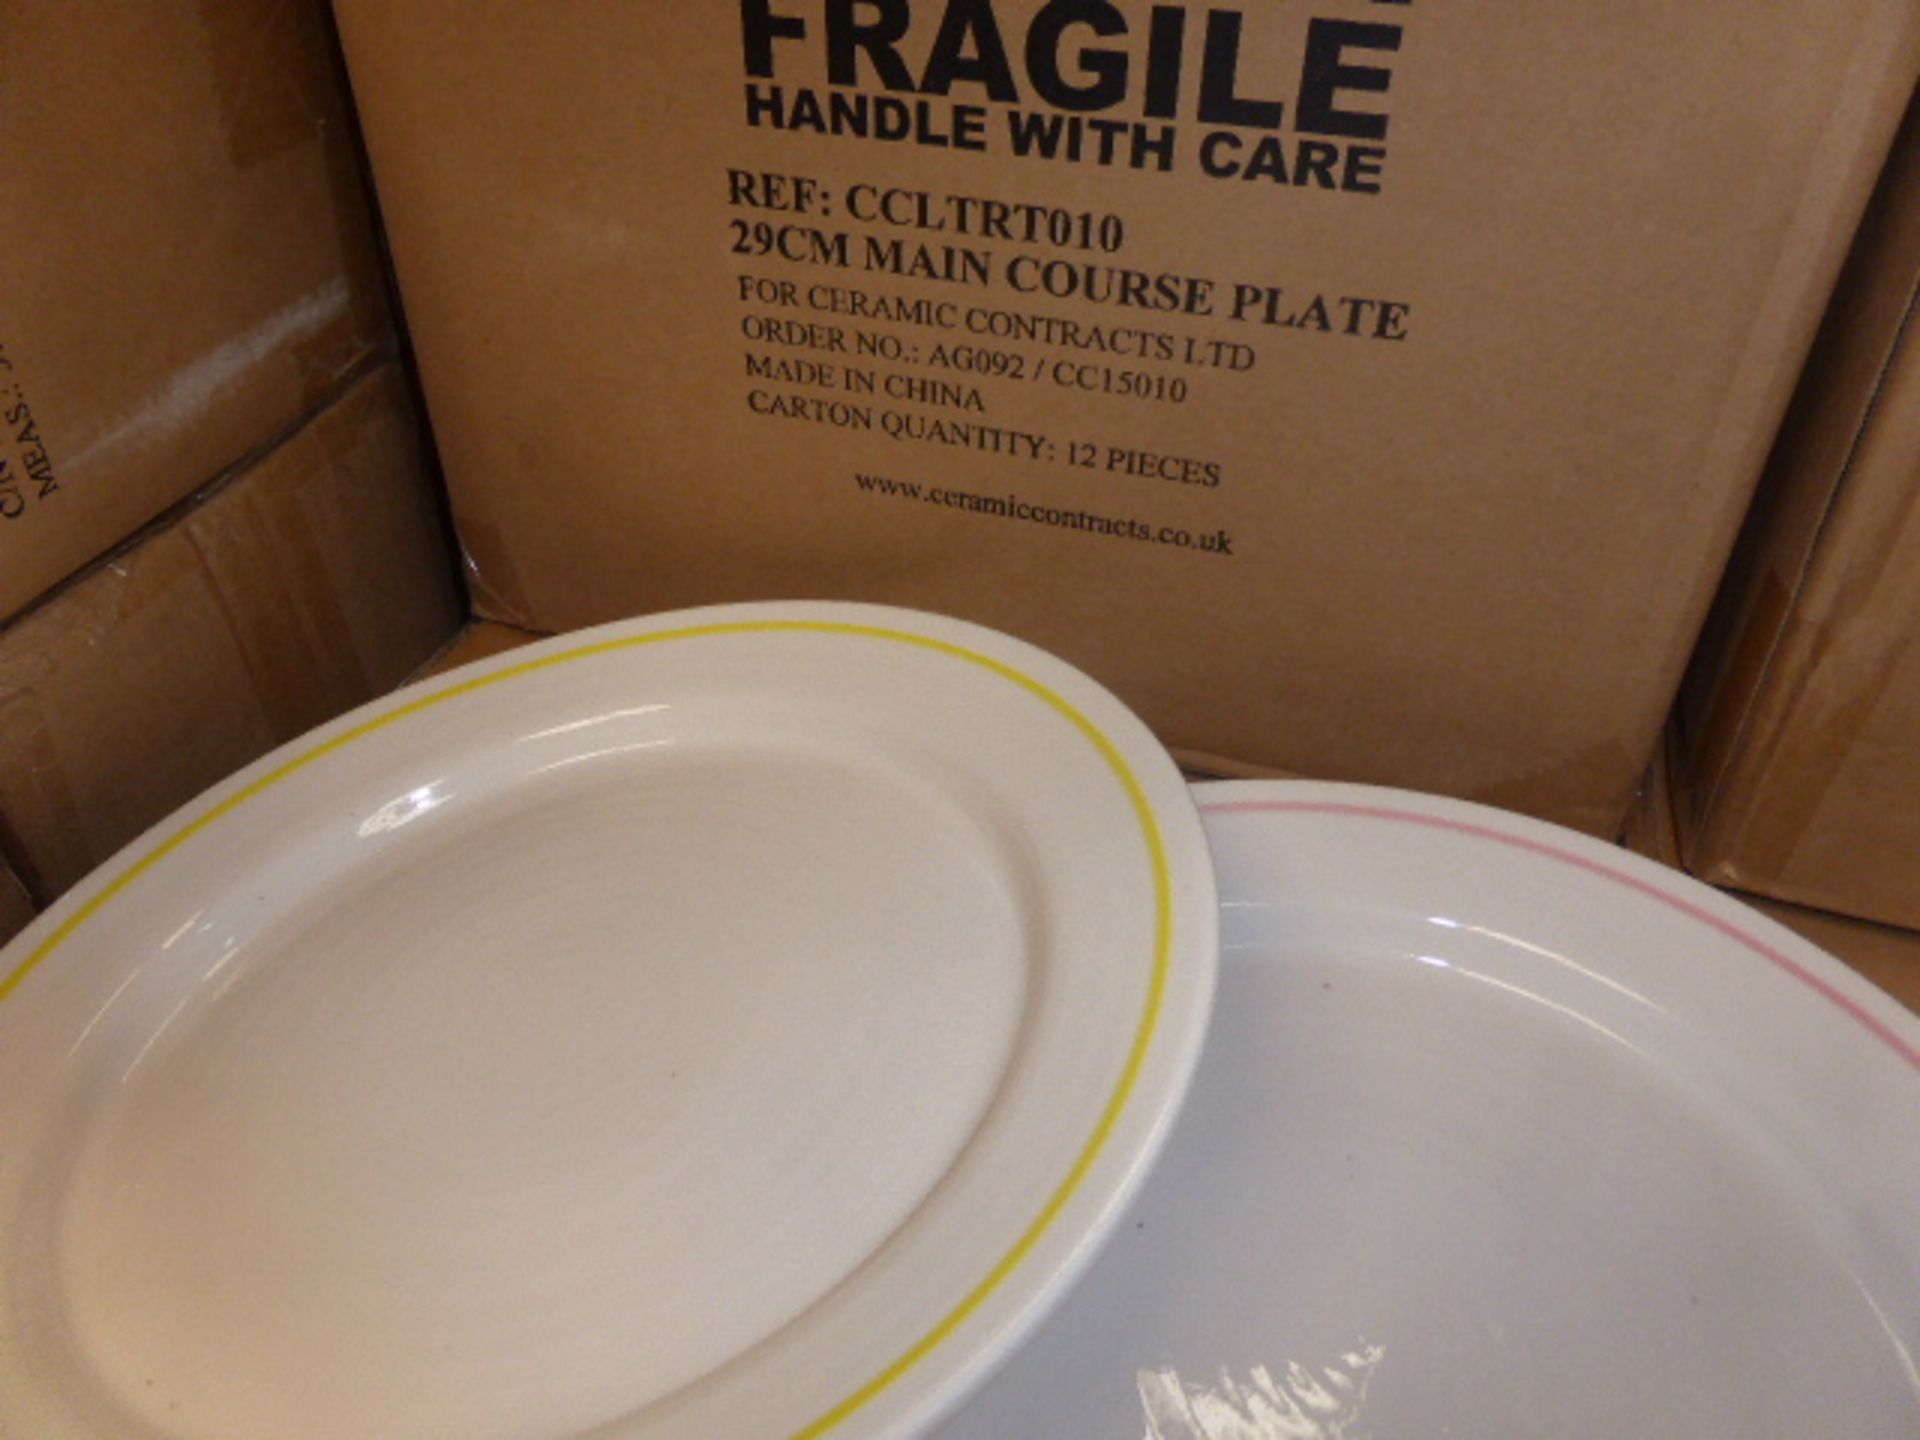 12 25cm high rimmed plates in white with multi colour rim finish